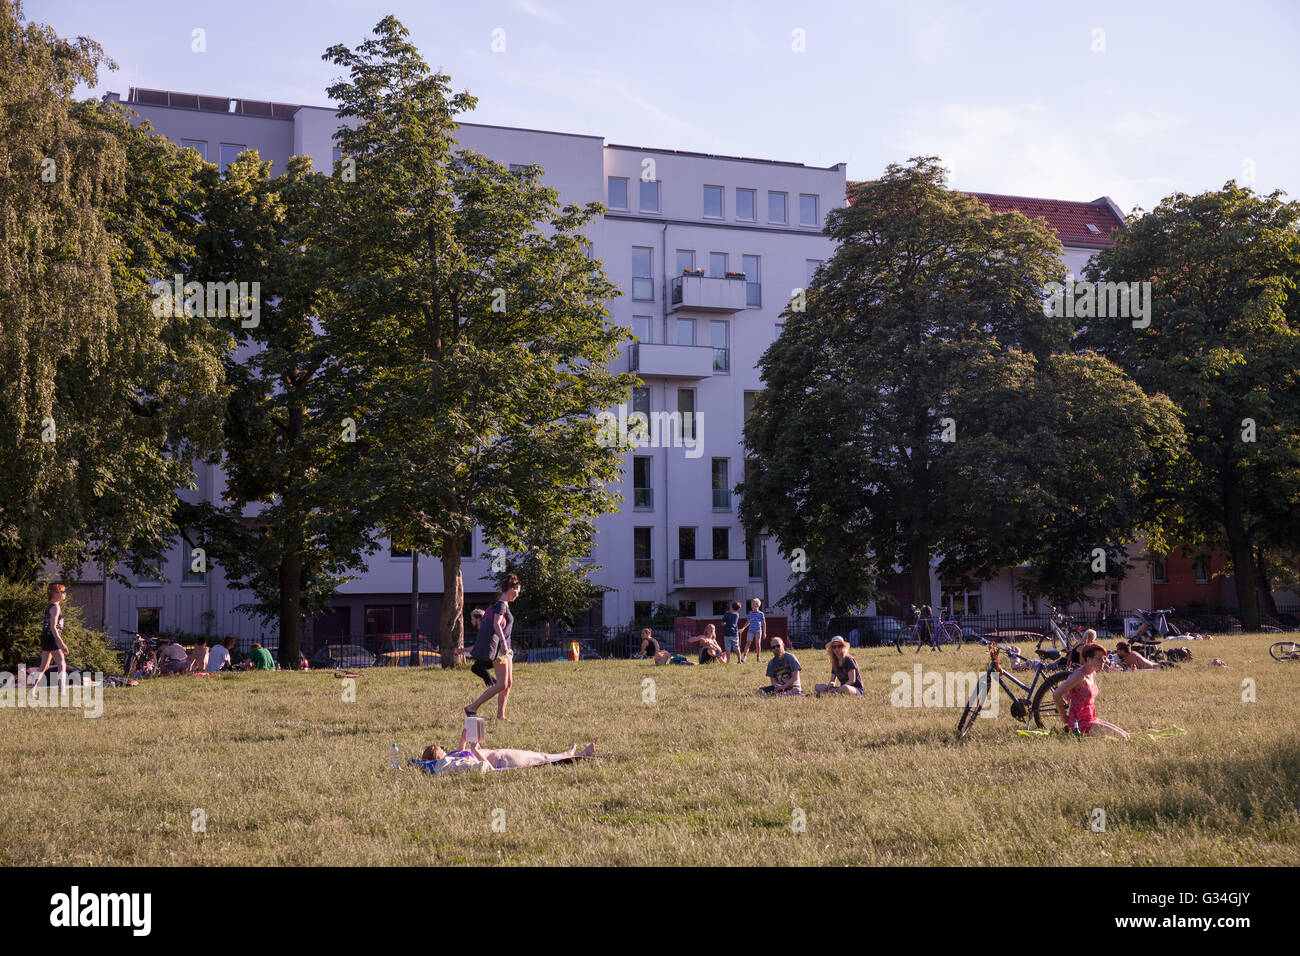 A summer day in Berlin. People enjoy the nice weather in a park, Stock Photo